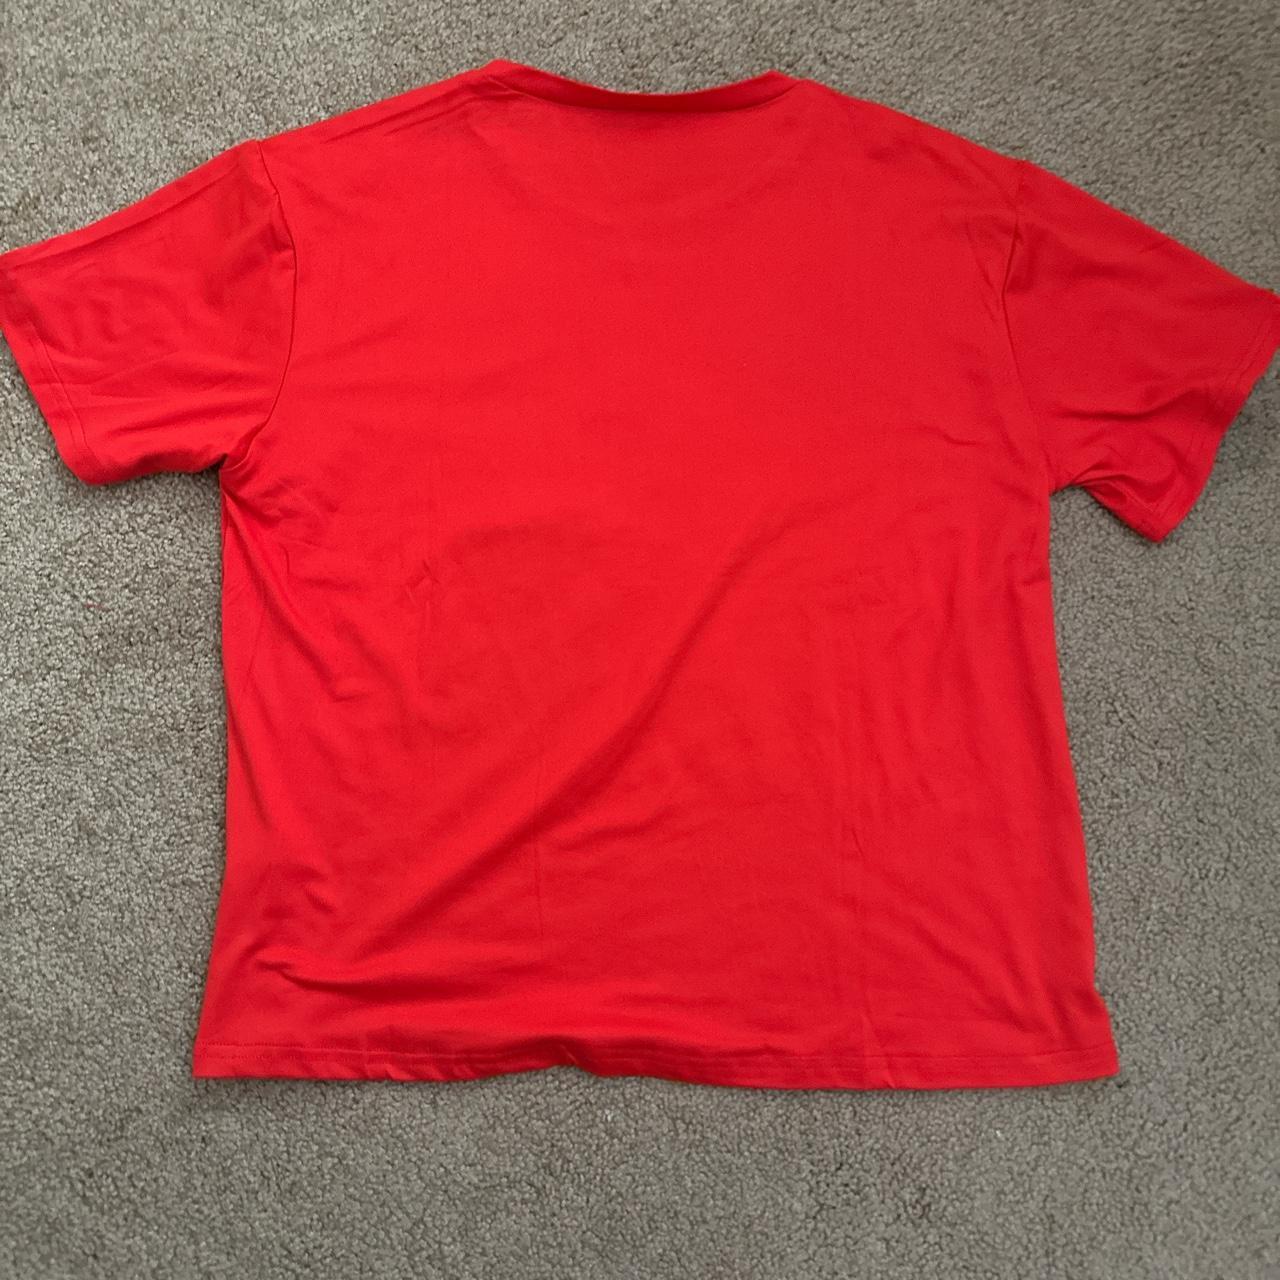 Red tee No clue what brand i got it at the thrift... - Depop